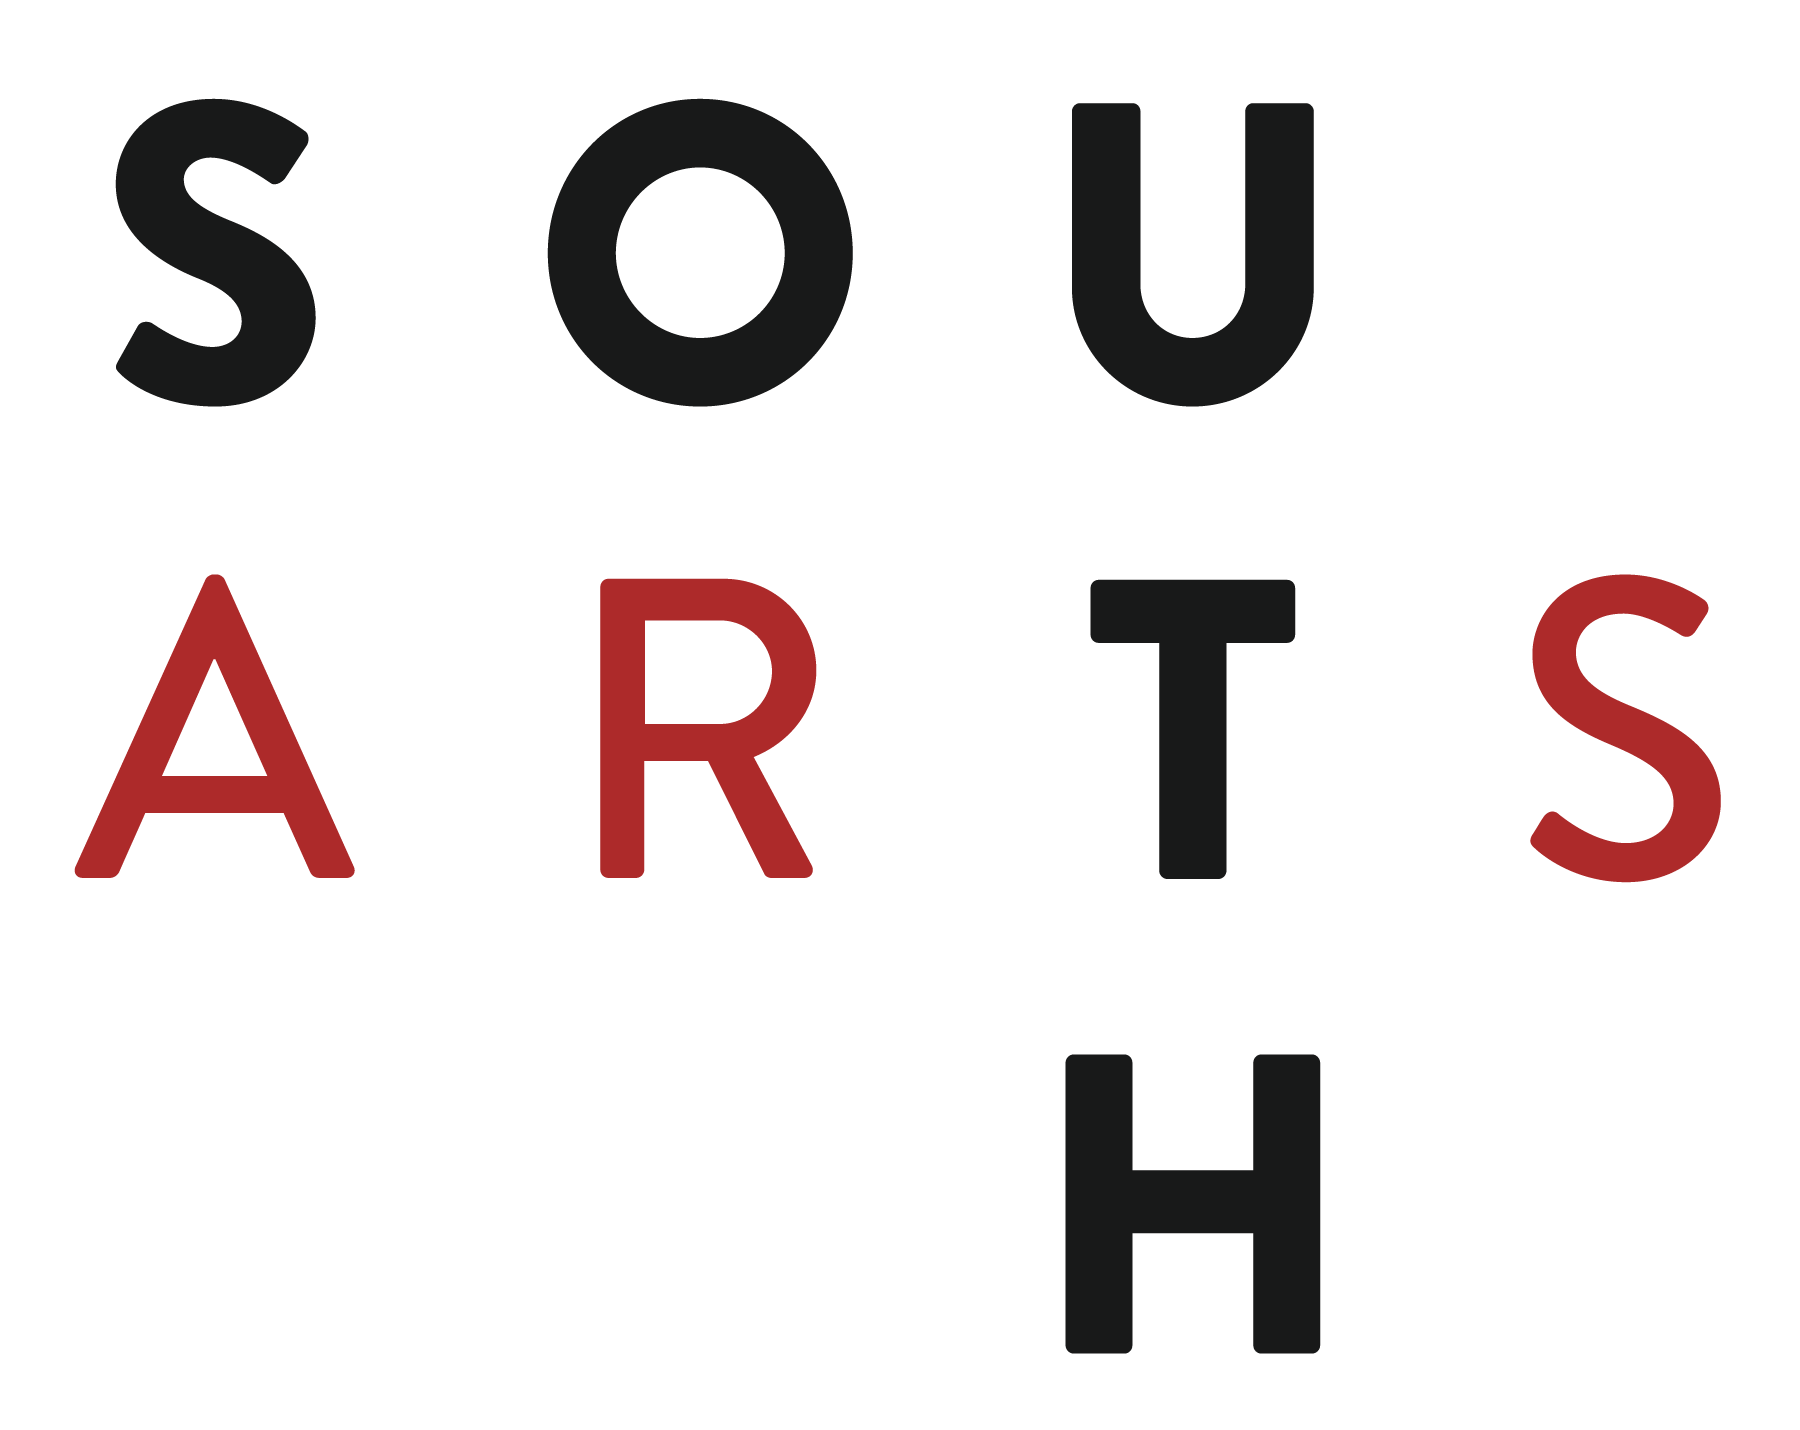 https://louisiana-arts.org/wp-content/uploads/2022/03/South_Arts_logo-primary.png